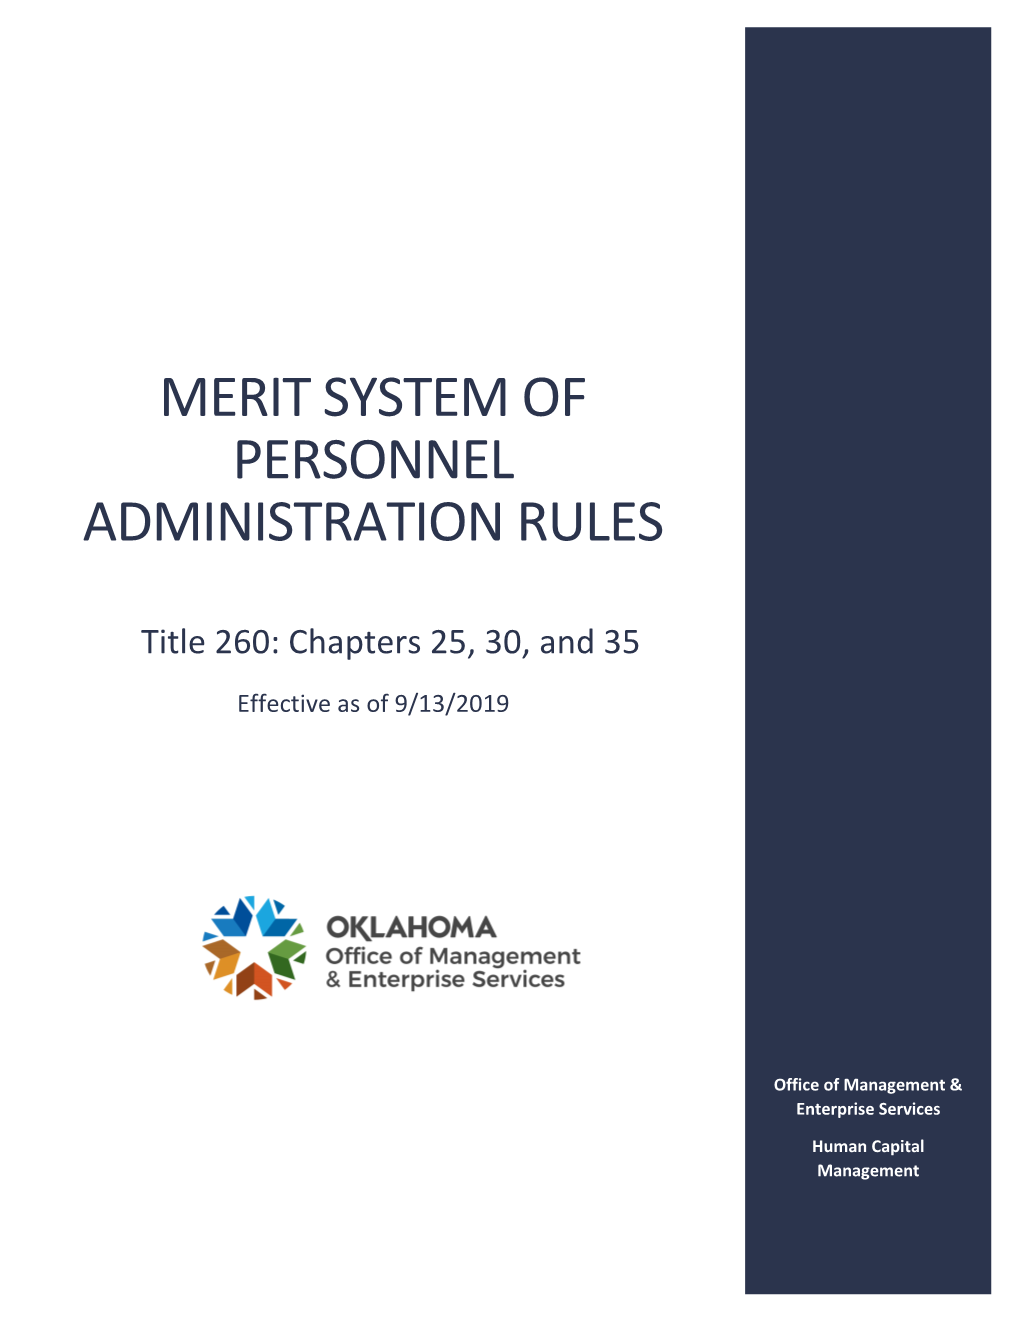 Merit Rules Title 260 Chapters, 25, 30, 35